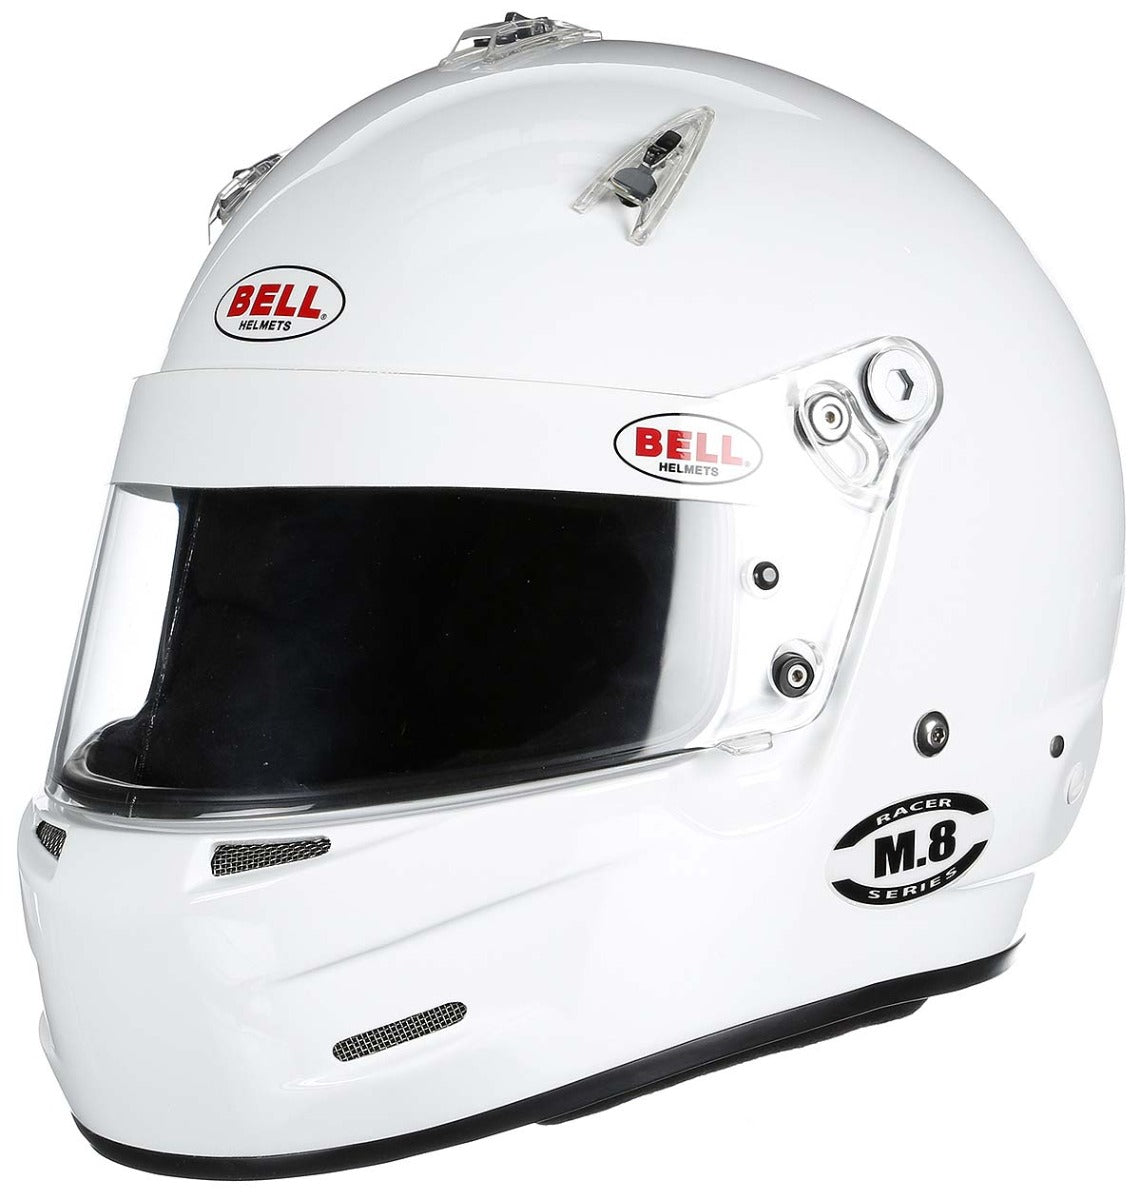 Bell M.8 Helmet SA2020 white - Front View Image